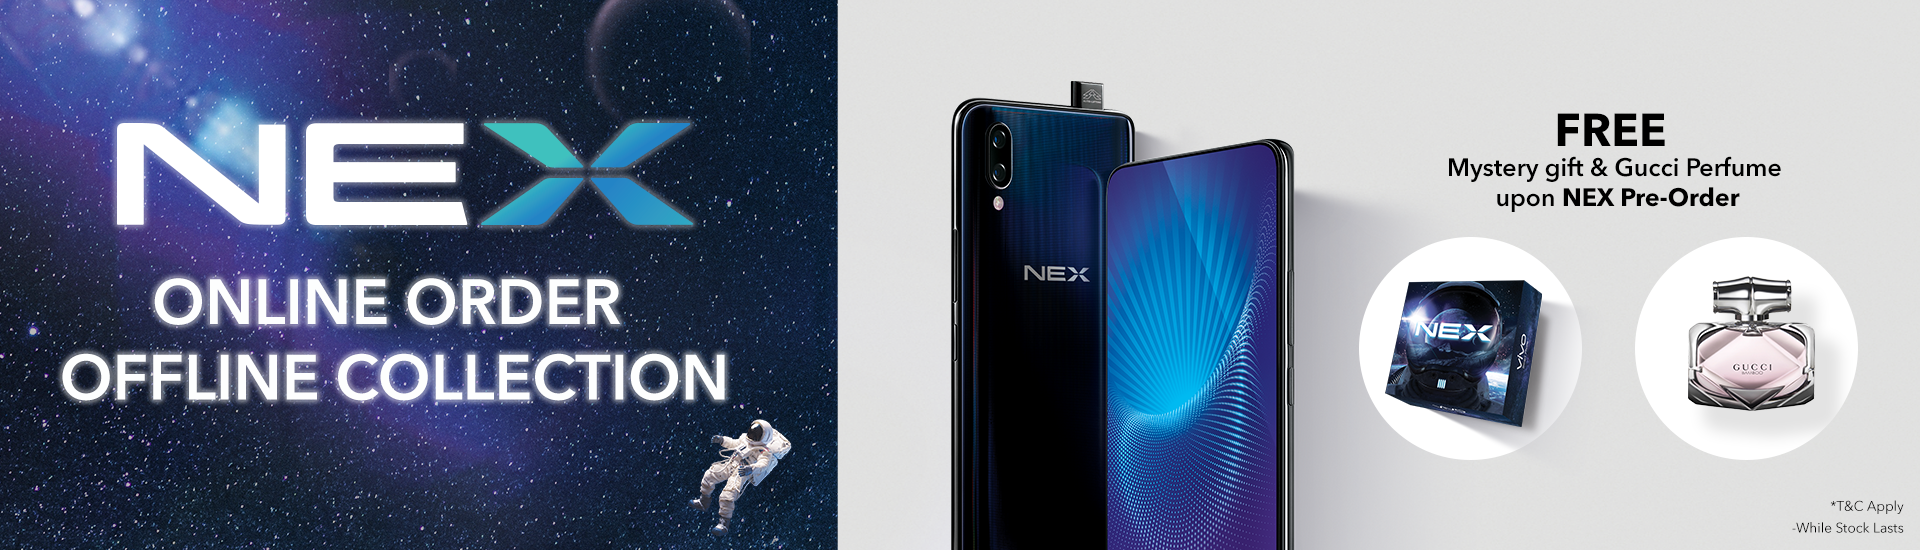 vivo NEX pre-order kicking off with a RM399 mystery gift box and a chance to win a free Gucci Perfume